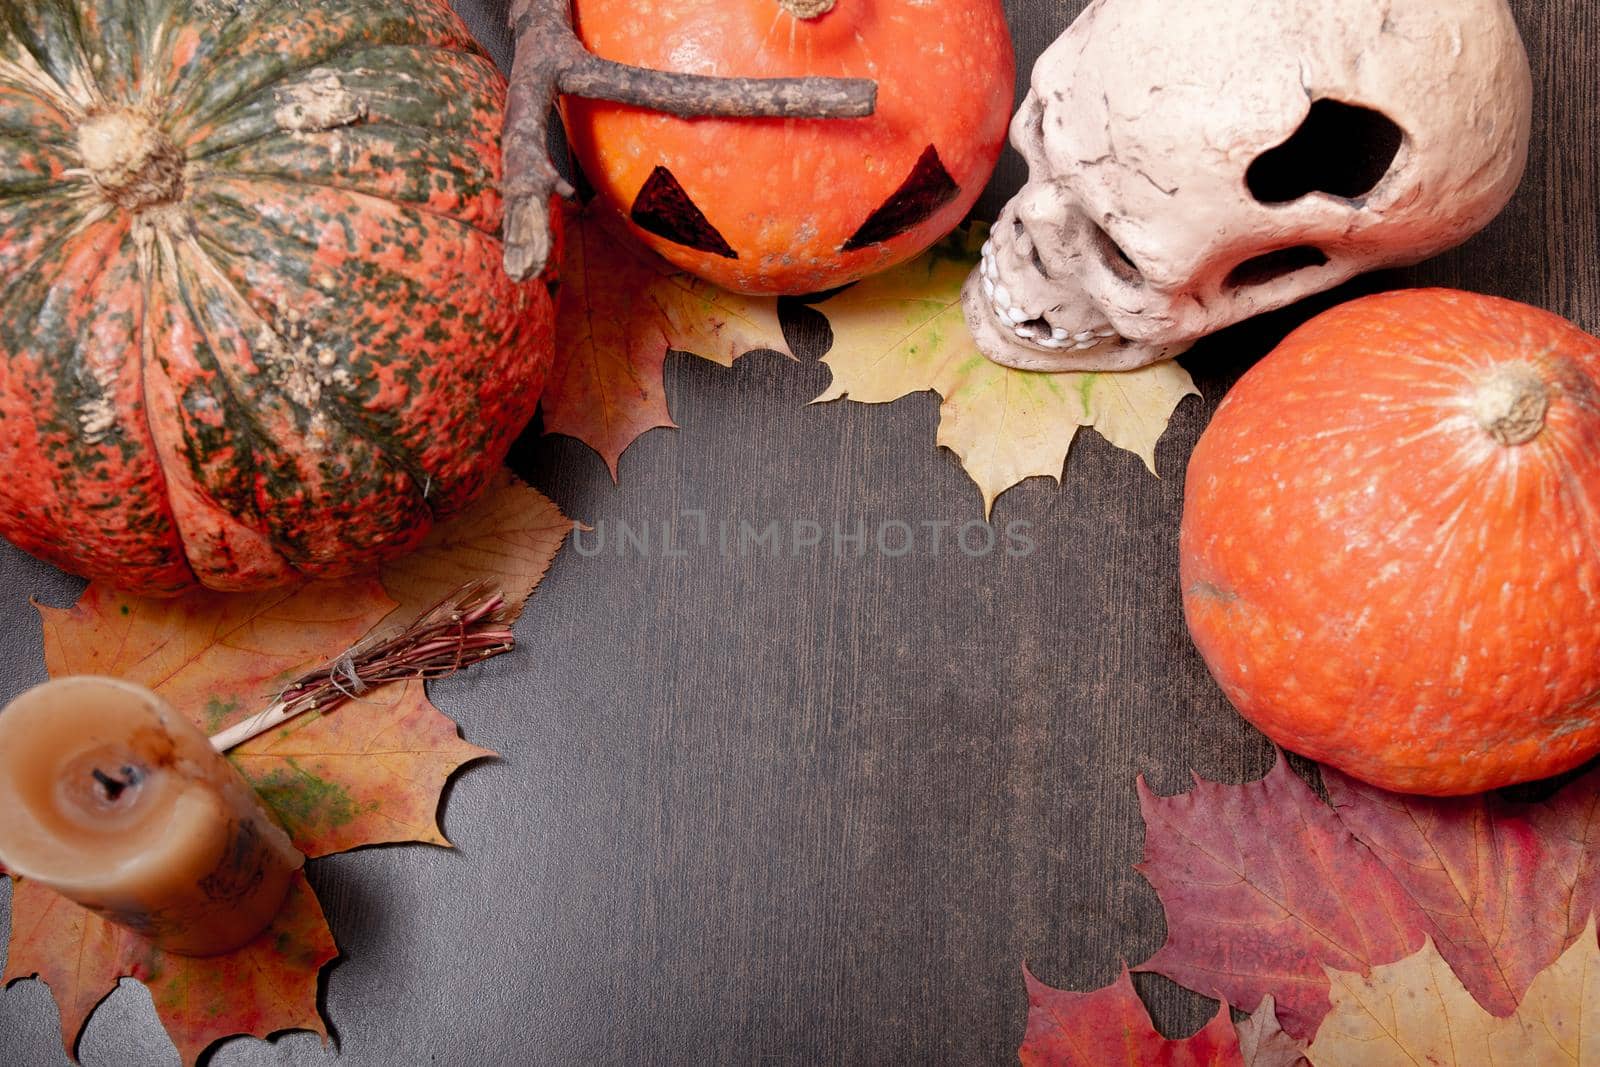 ceramic skull, candle, decorative broom and halloween pumpkins on a dark brown table background, autumn leaves and cones, copy space, top view